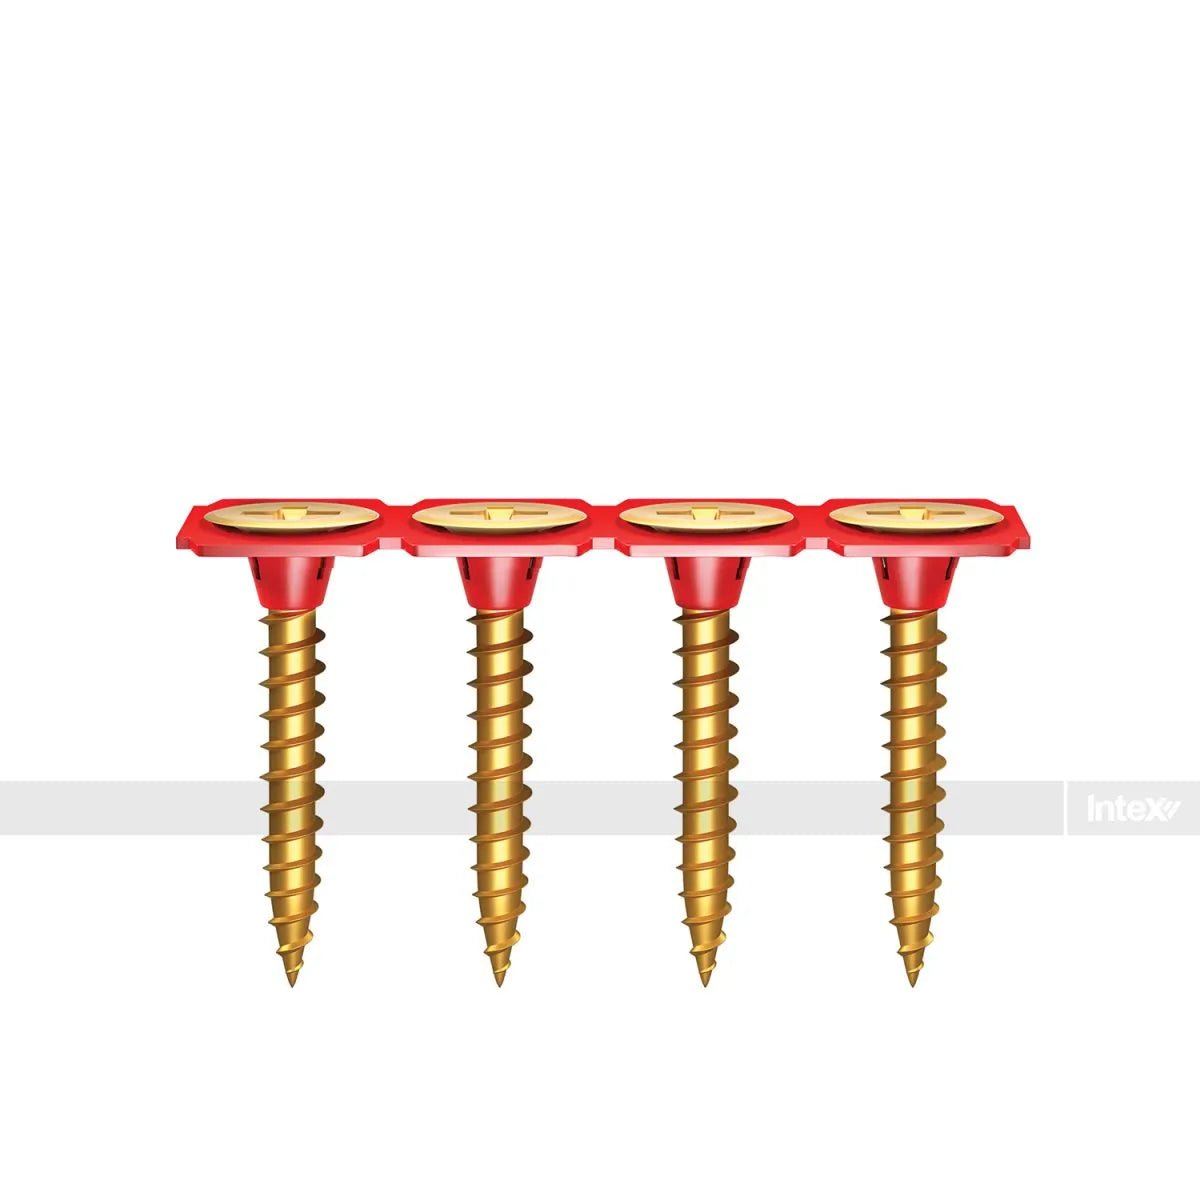 Intex Fine Needle for Light Metal Collated Screws 6g x 25mm - 42mm